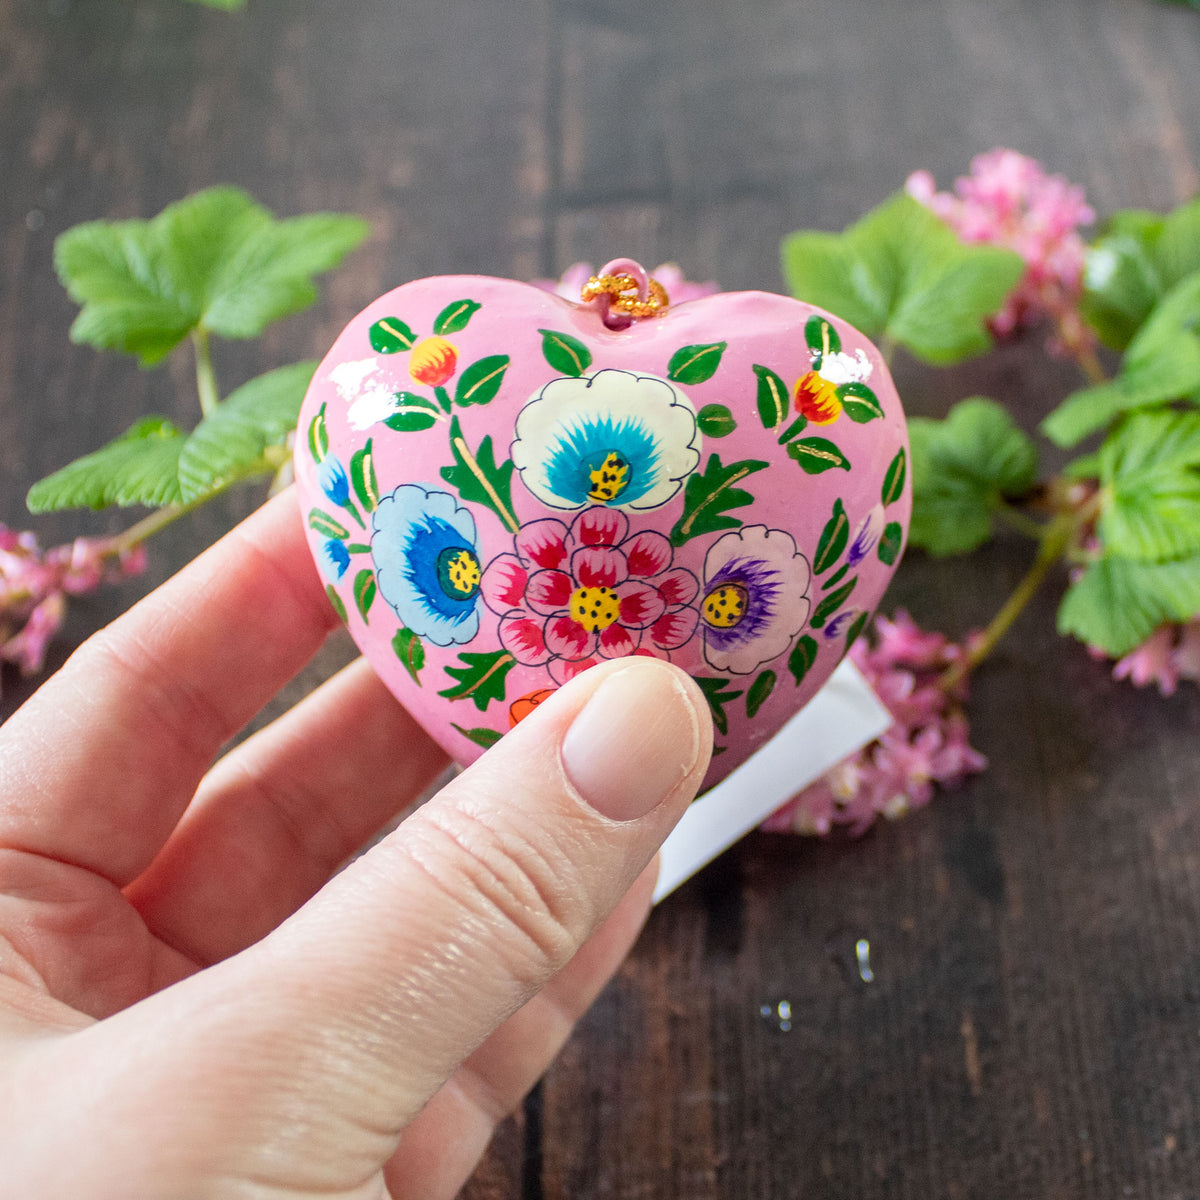 Hanging Spring Decoration - Painted Heart - Pink Flowers